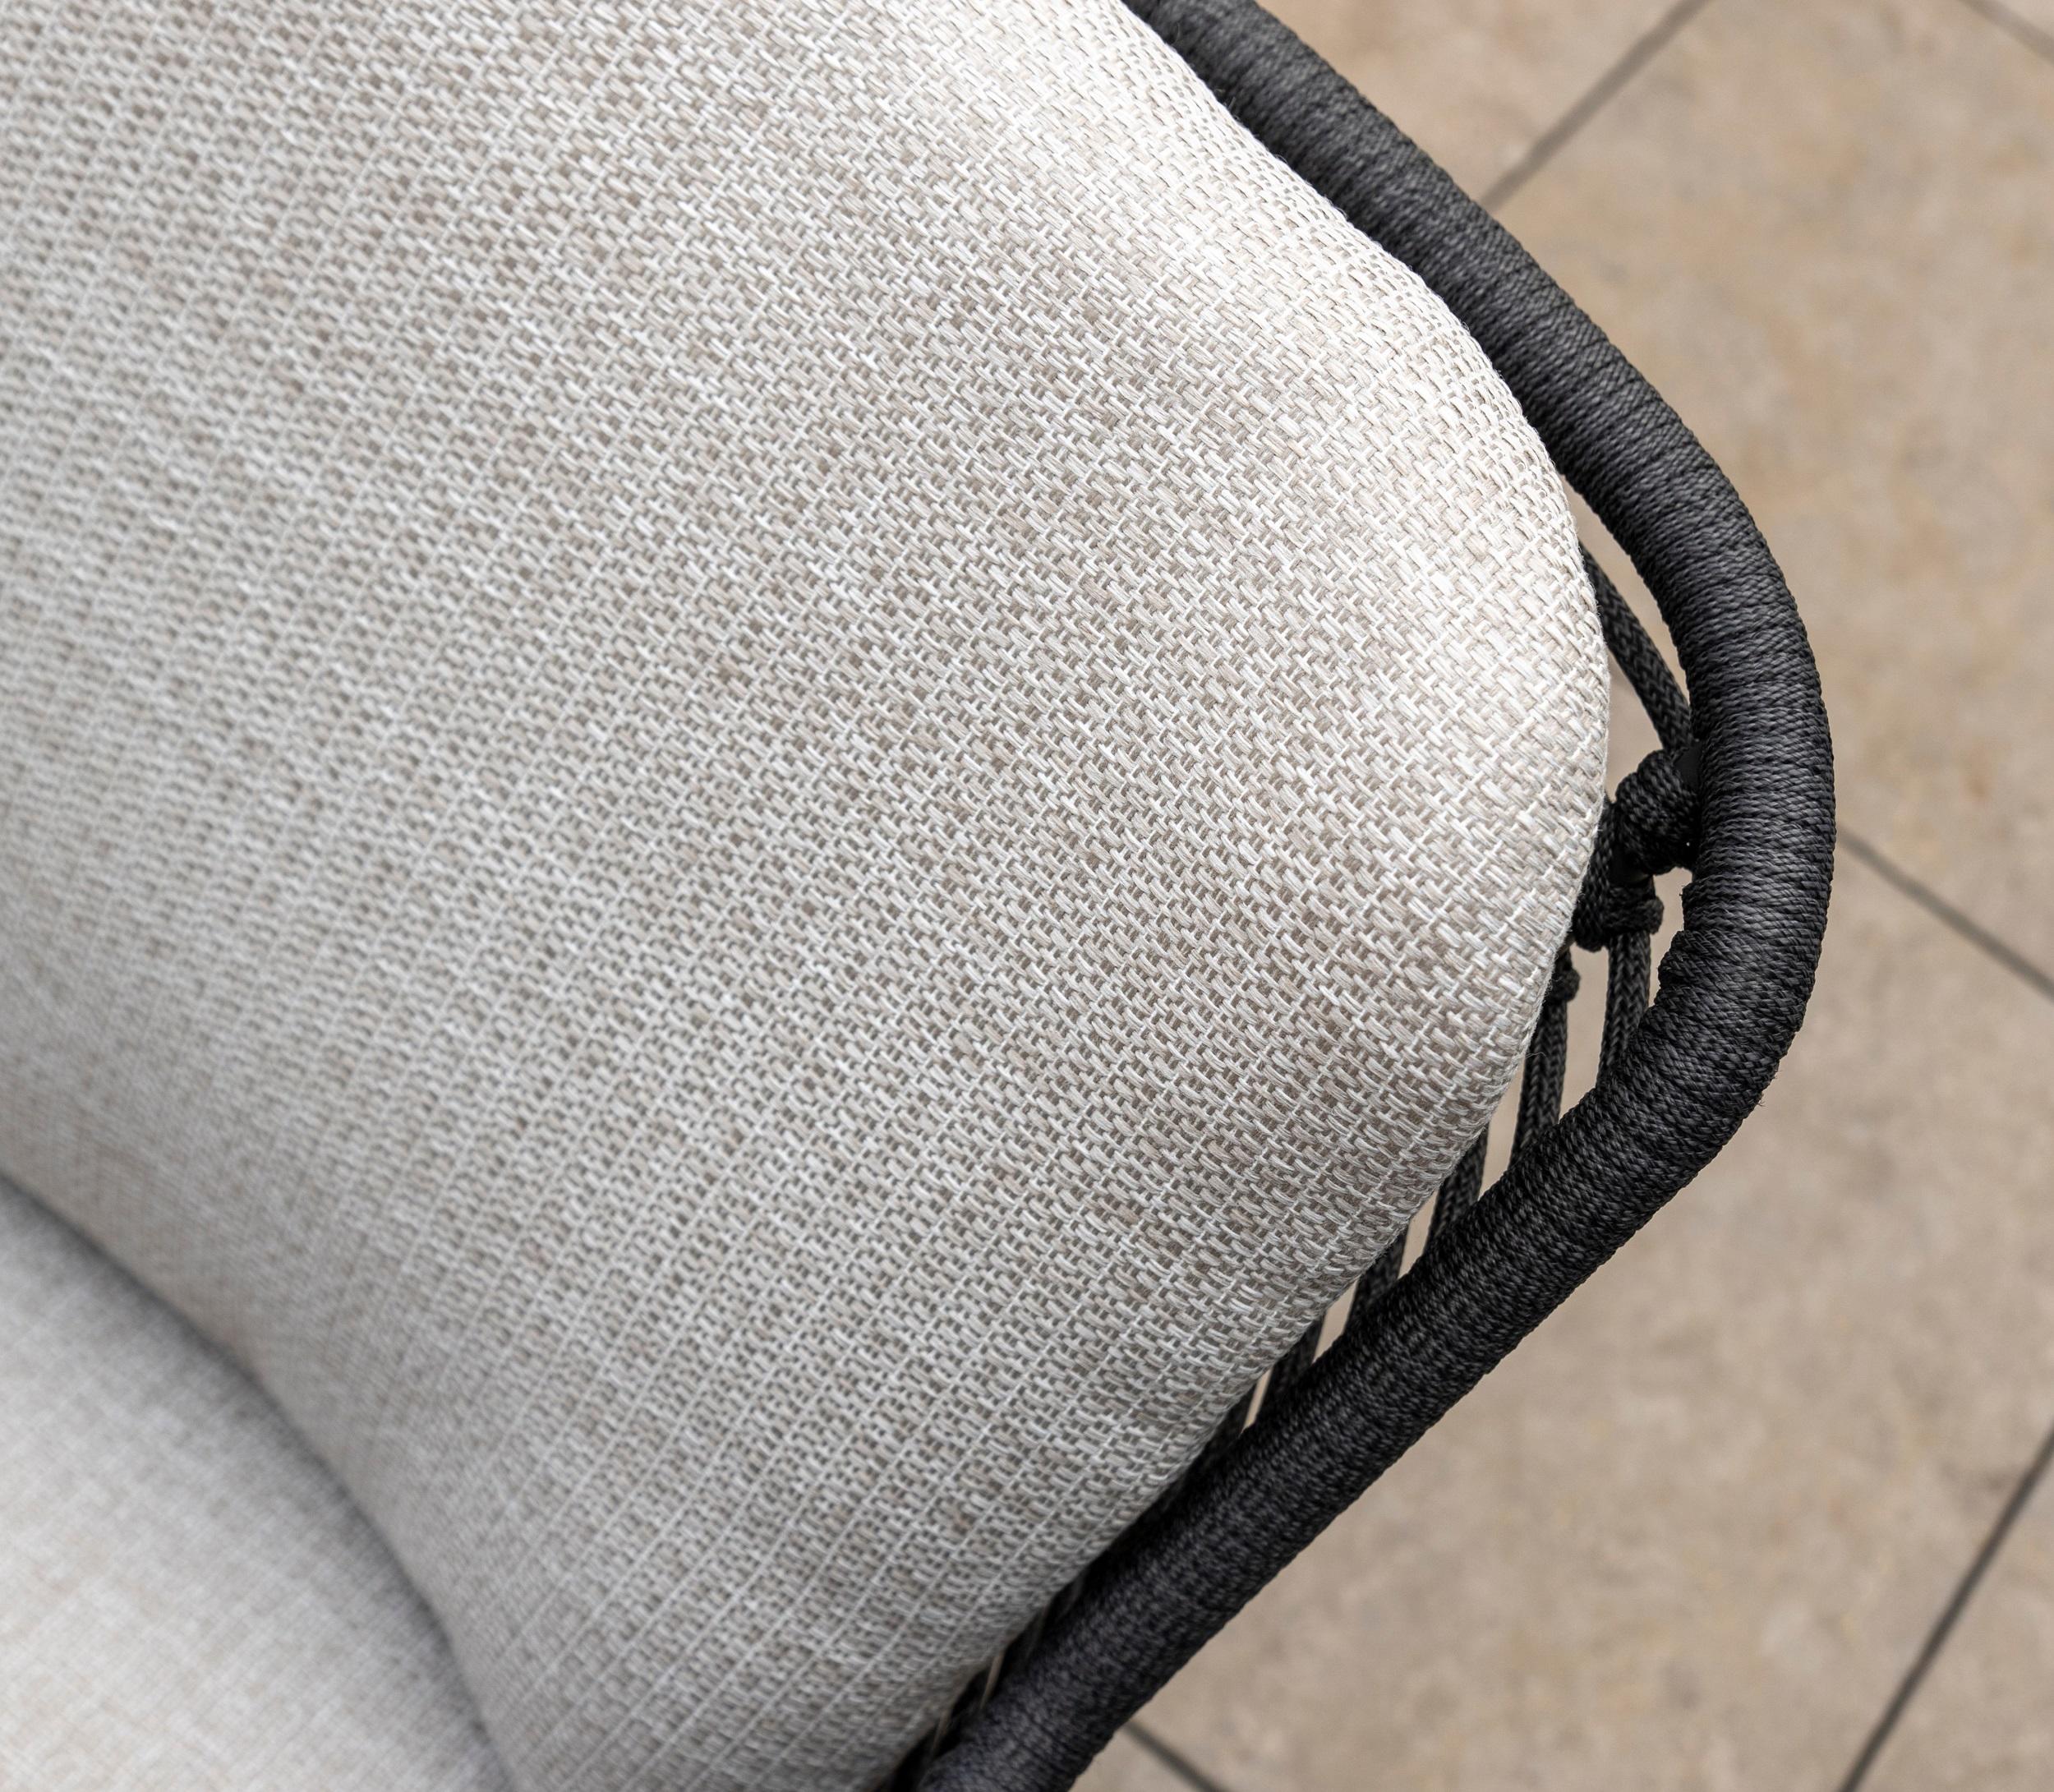 light grey weather resistant cushions on modern rope weave all weather garden dining chairs